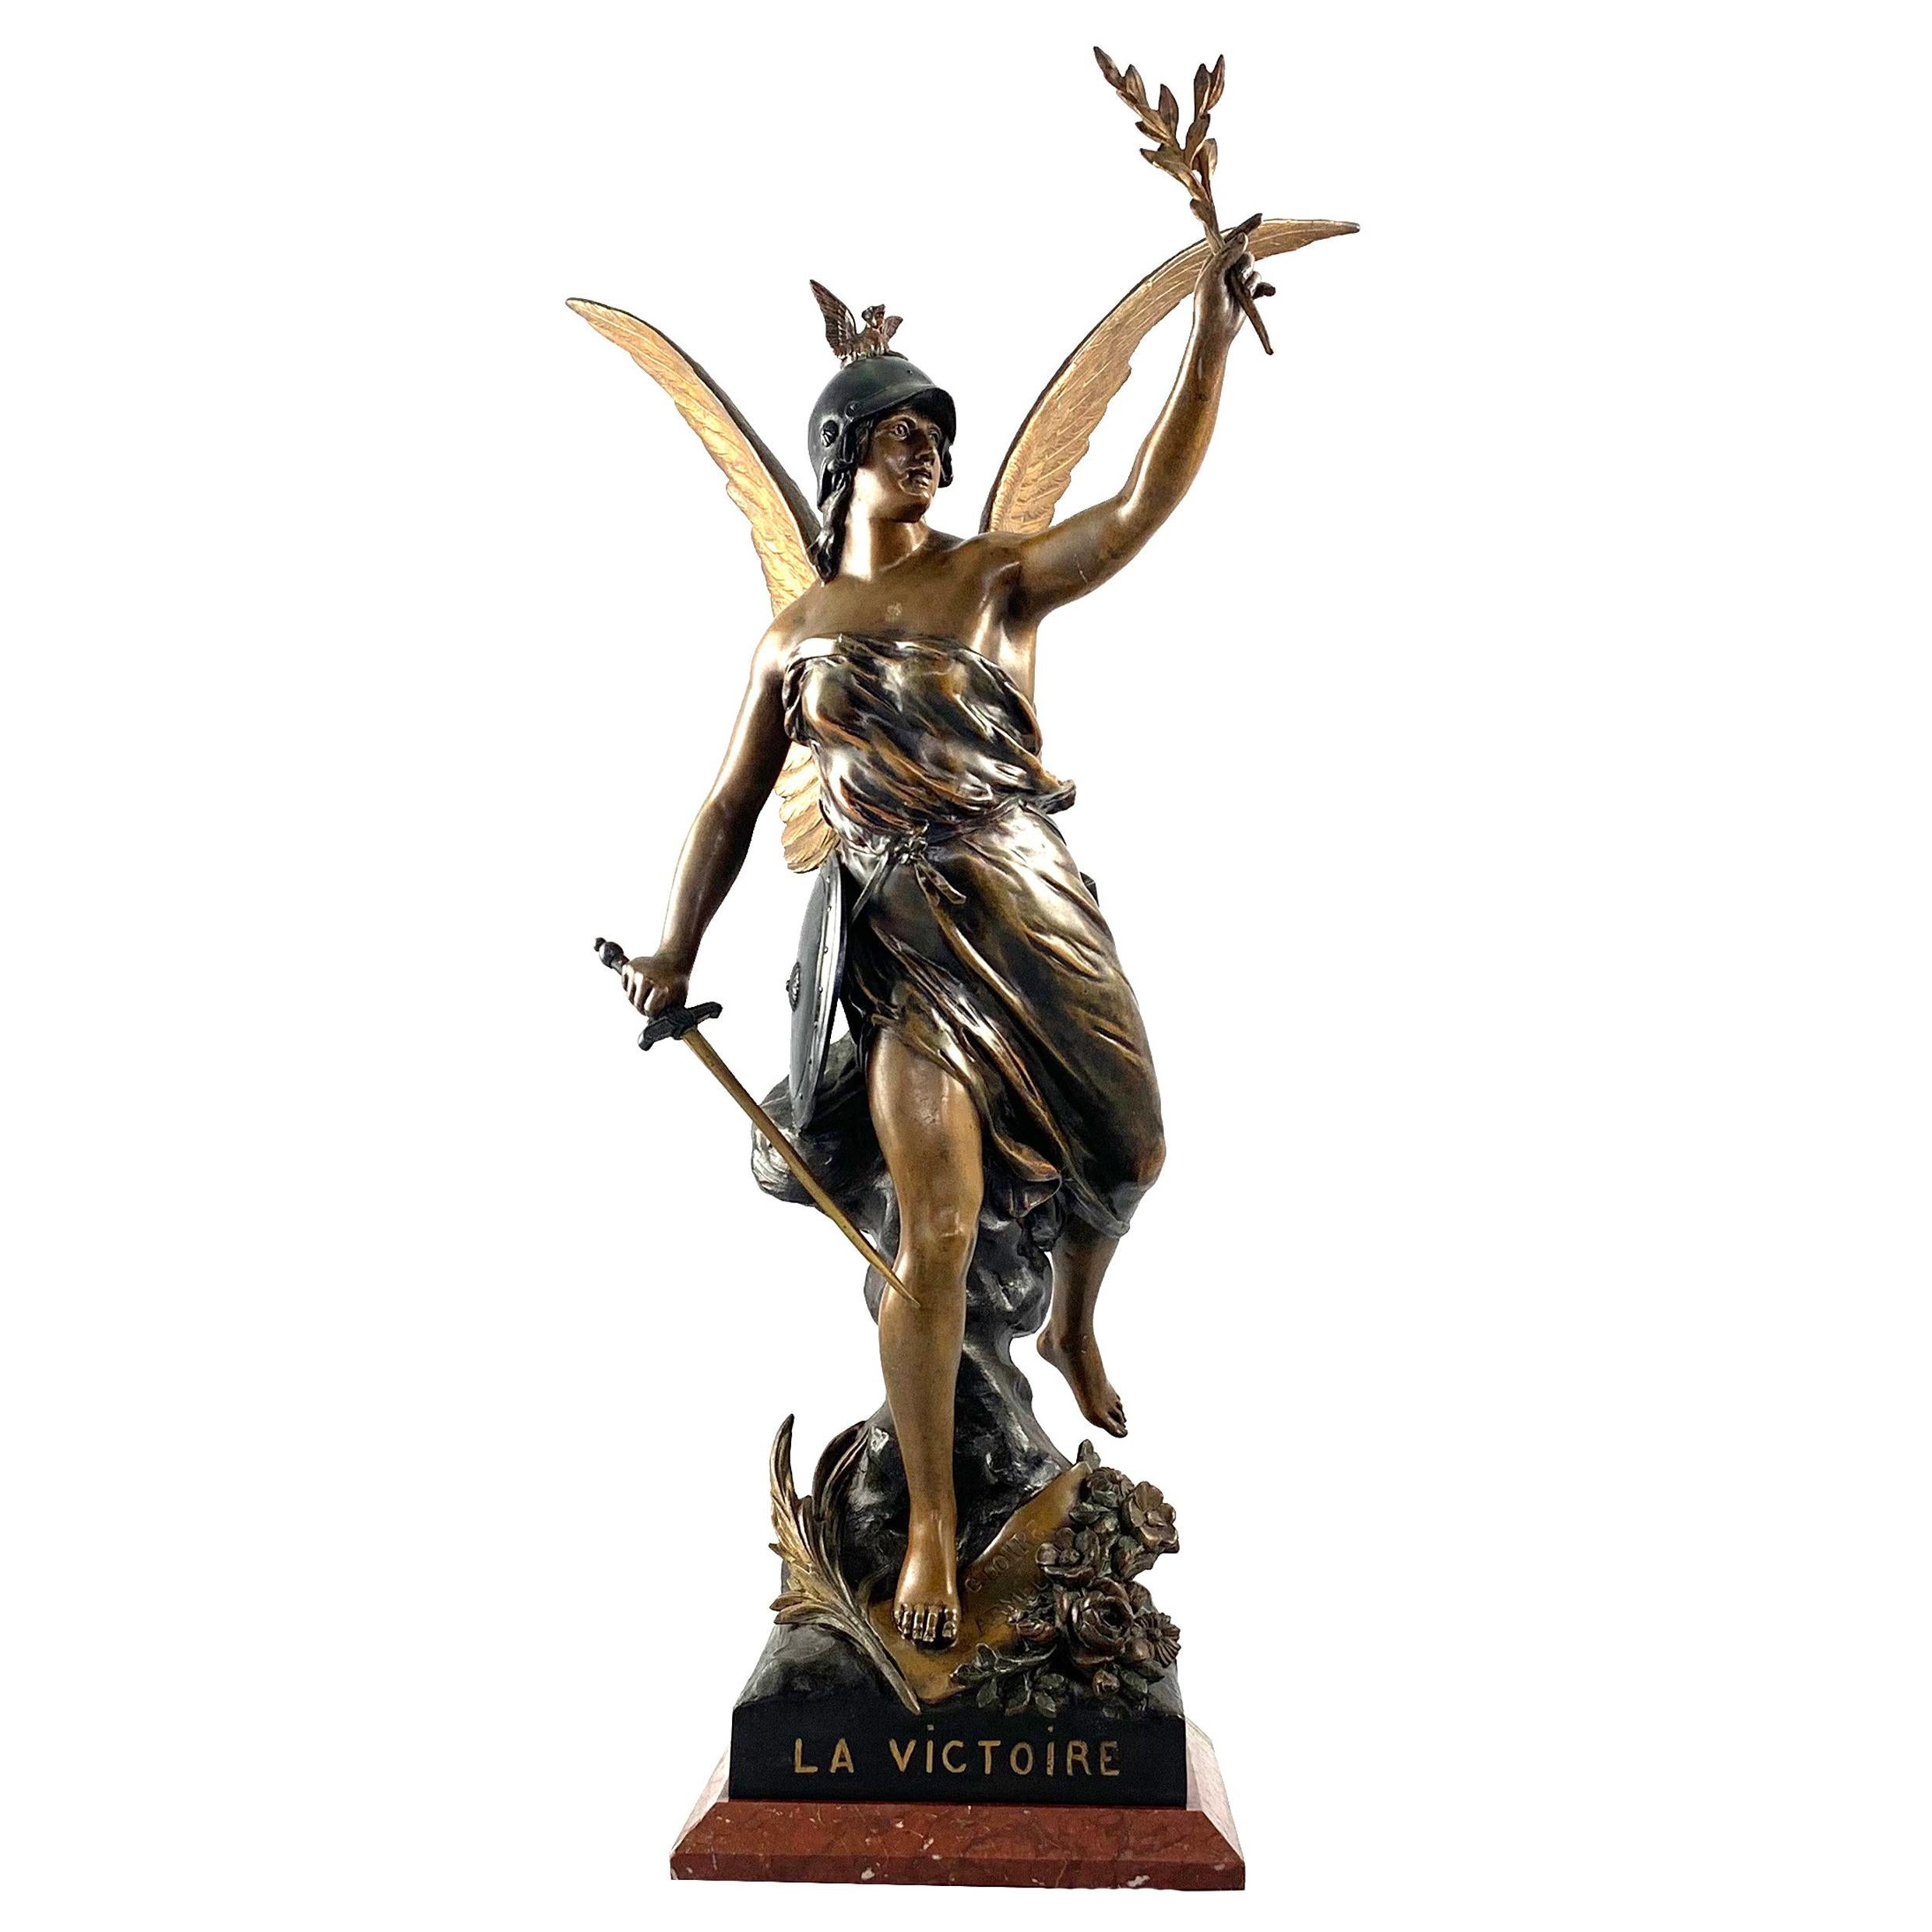 19th Century French Spelter Statue of Victory, Circa 1900, inscribed La Victoire